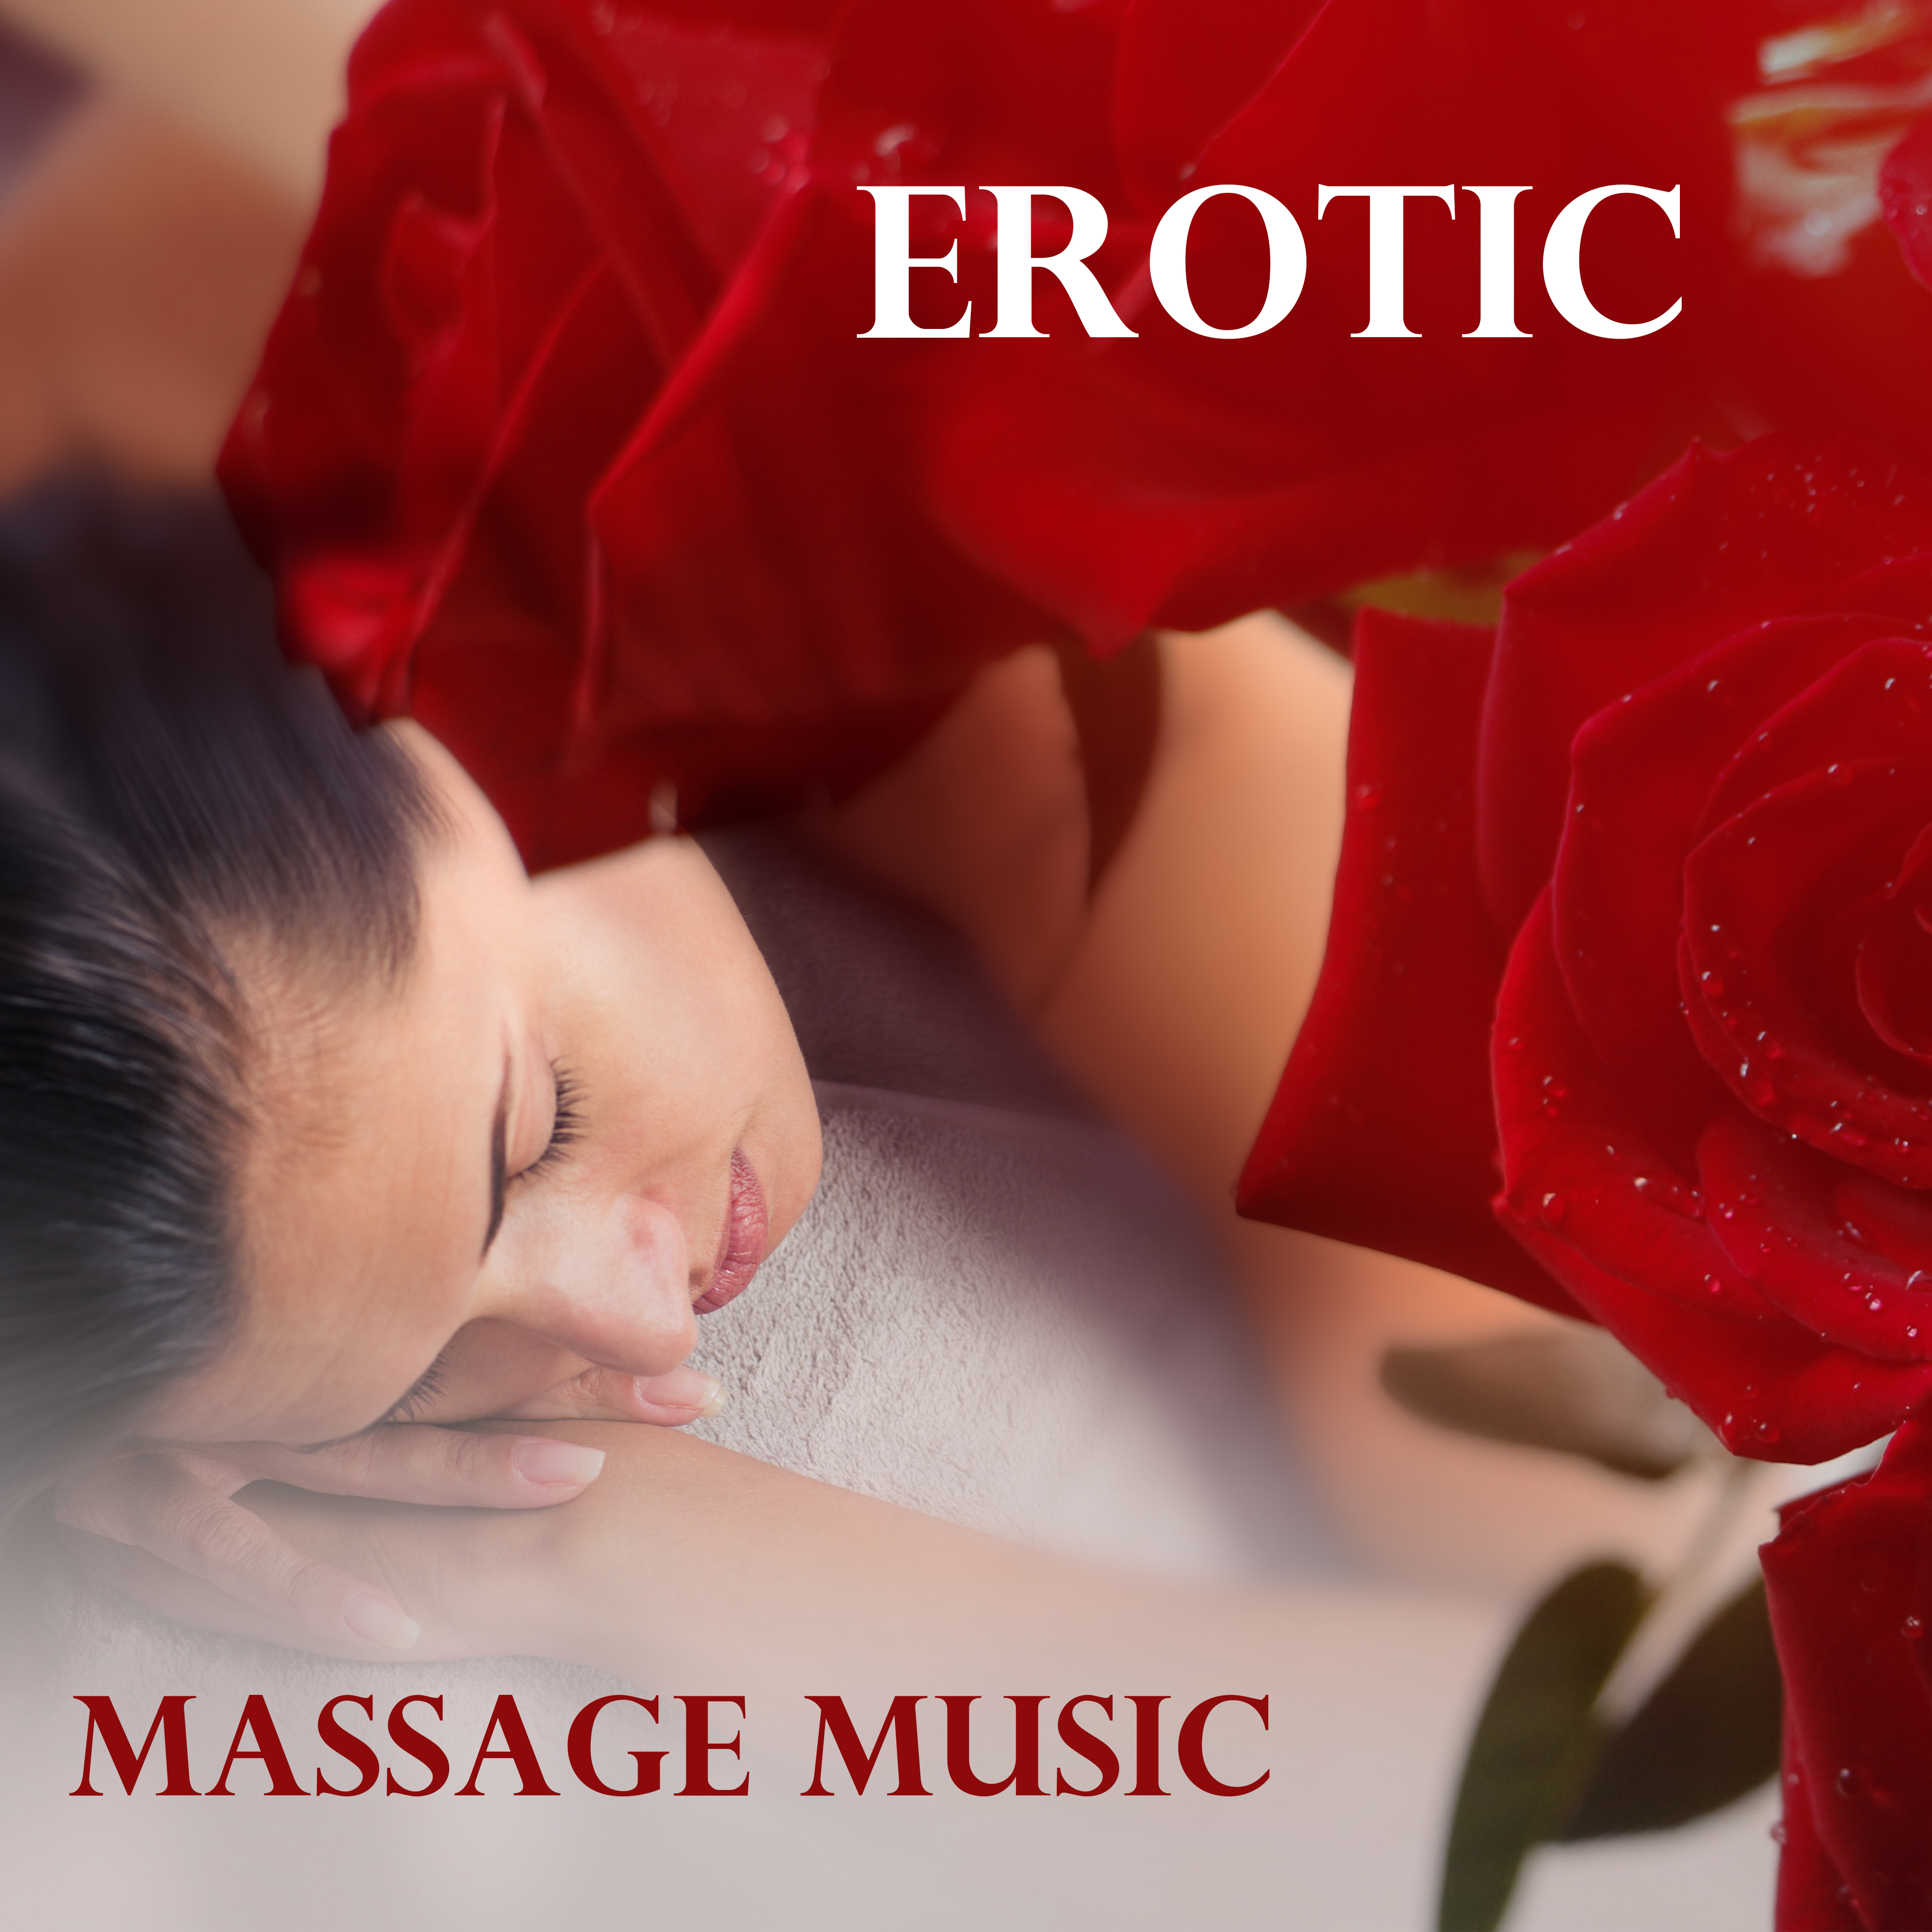 Erotic Massage Music  Calm Sounds to Relax, Love Music, New Age Melodies